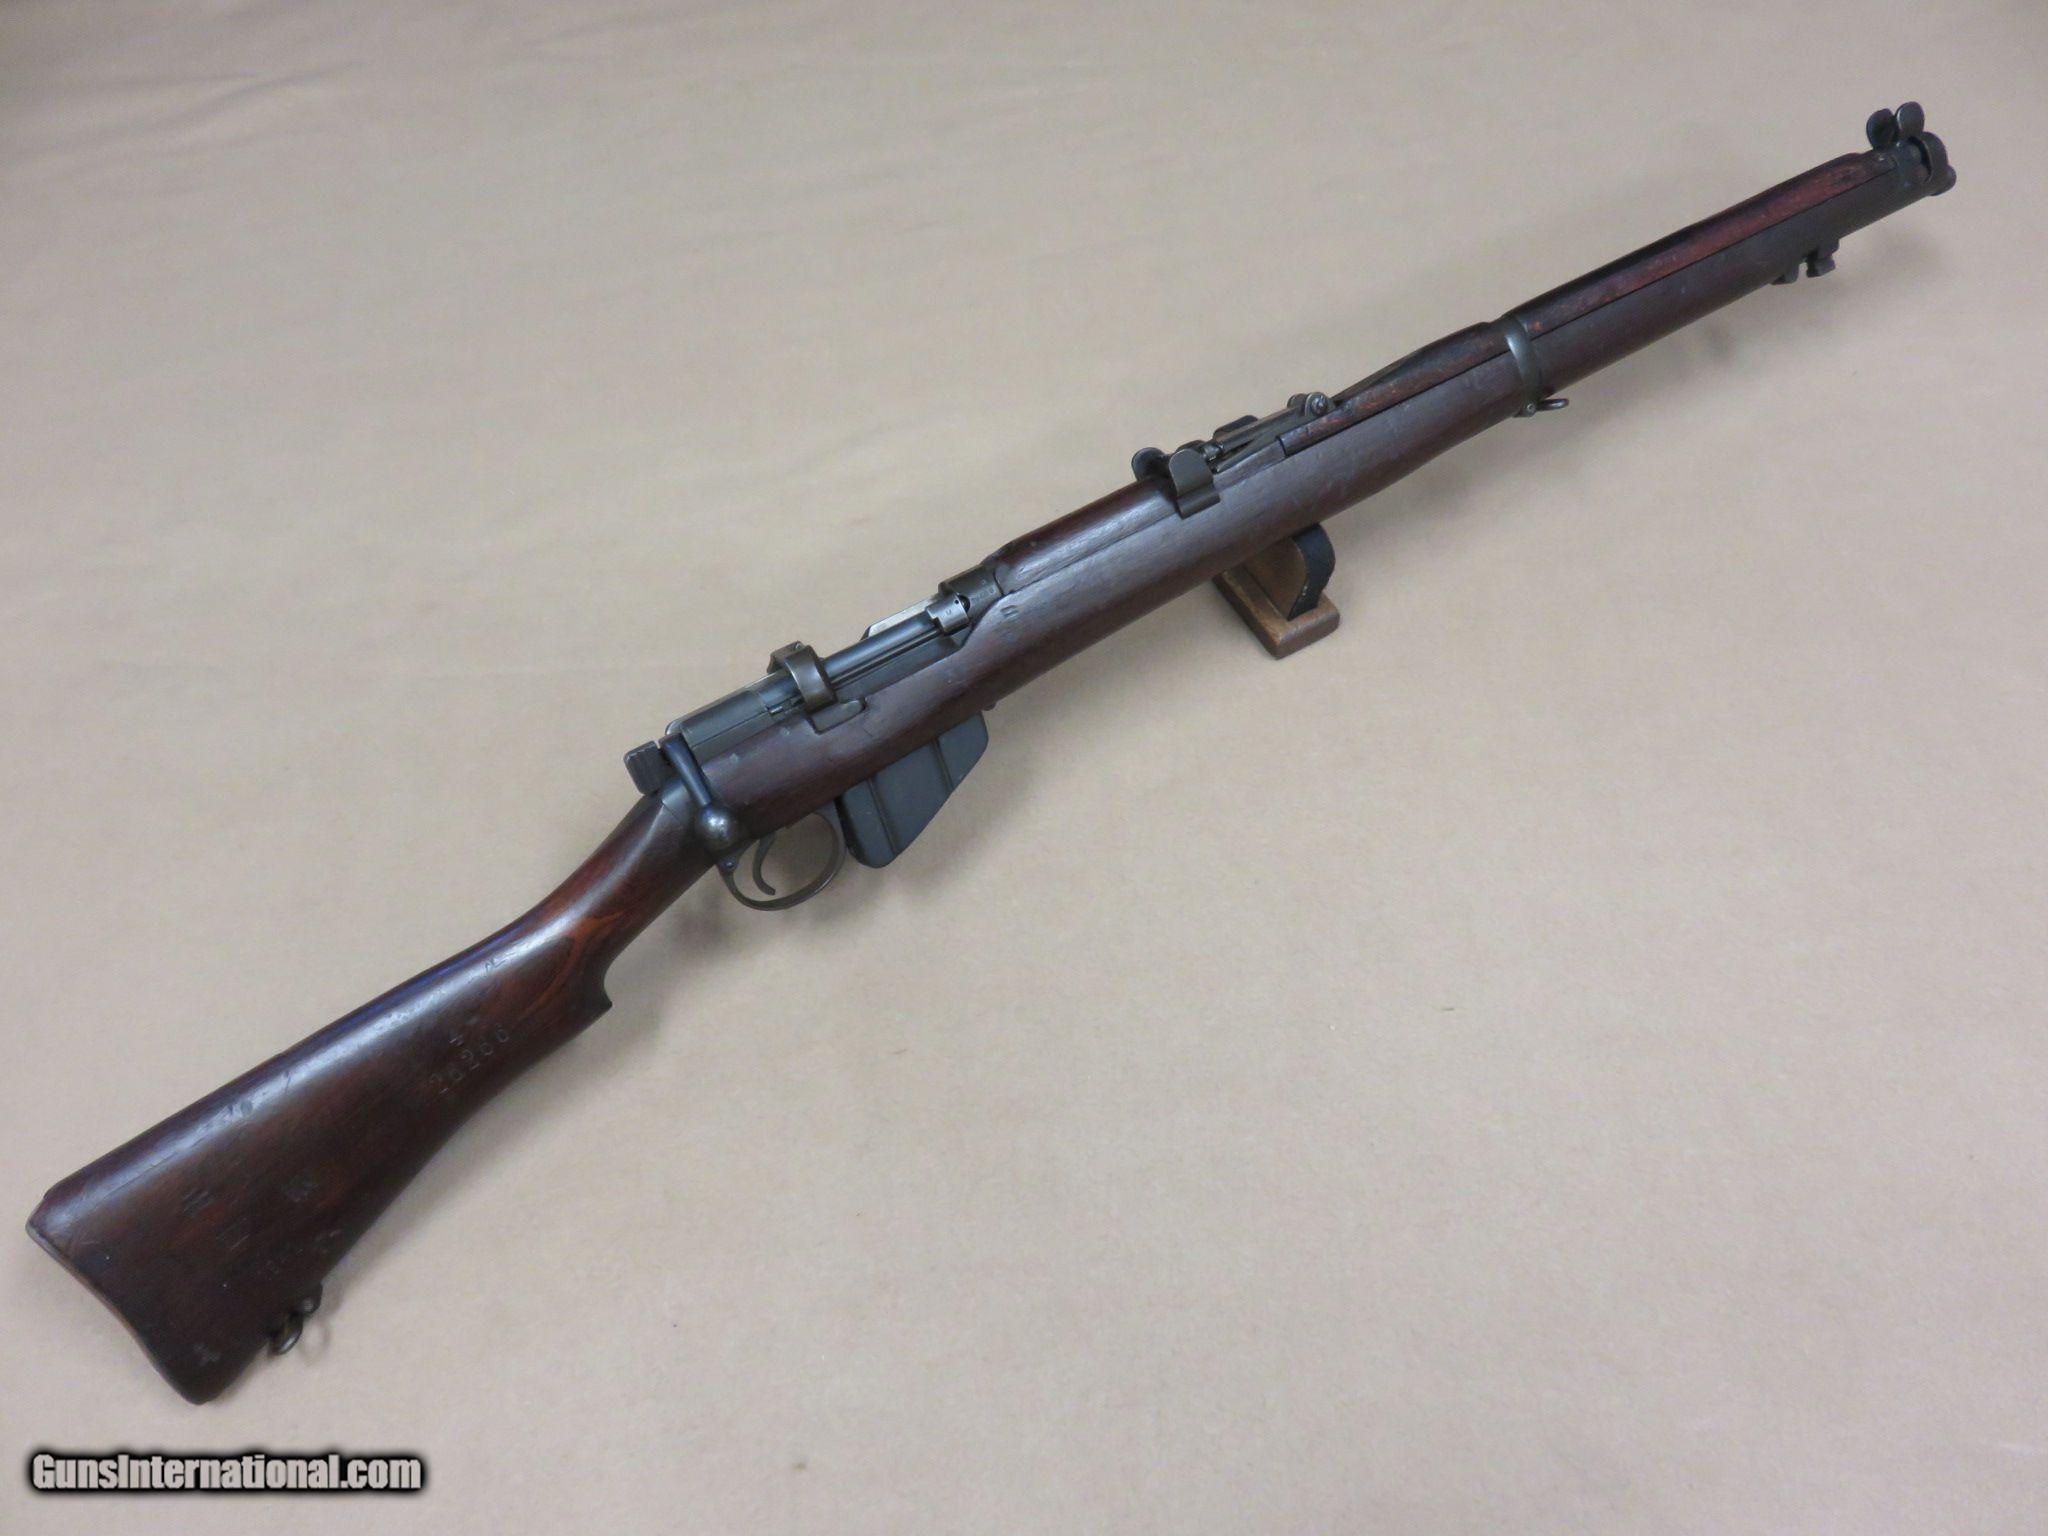 Lee-Enfield British WW2 Rifle Photographic Print for Sale by